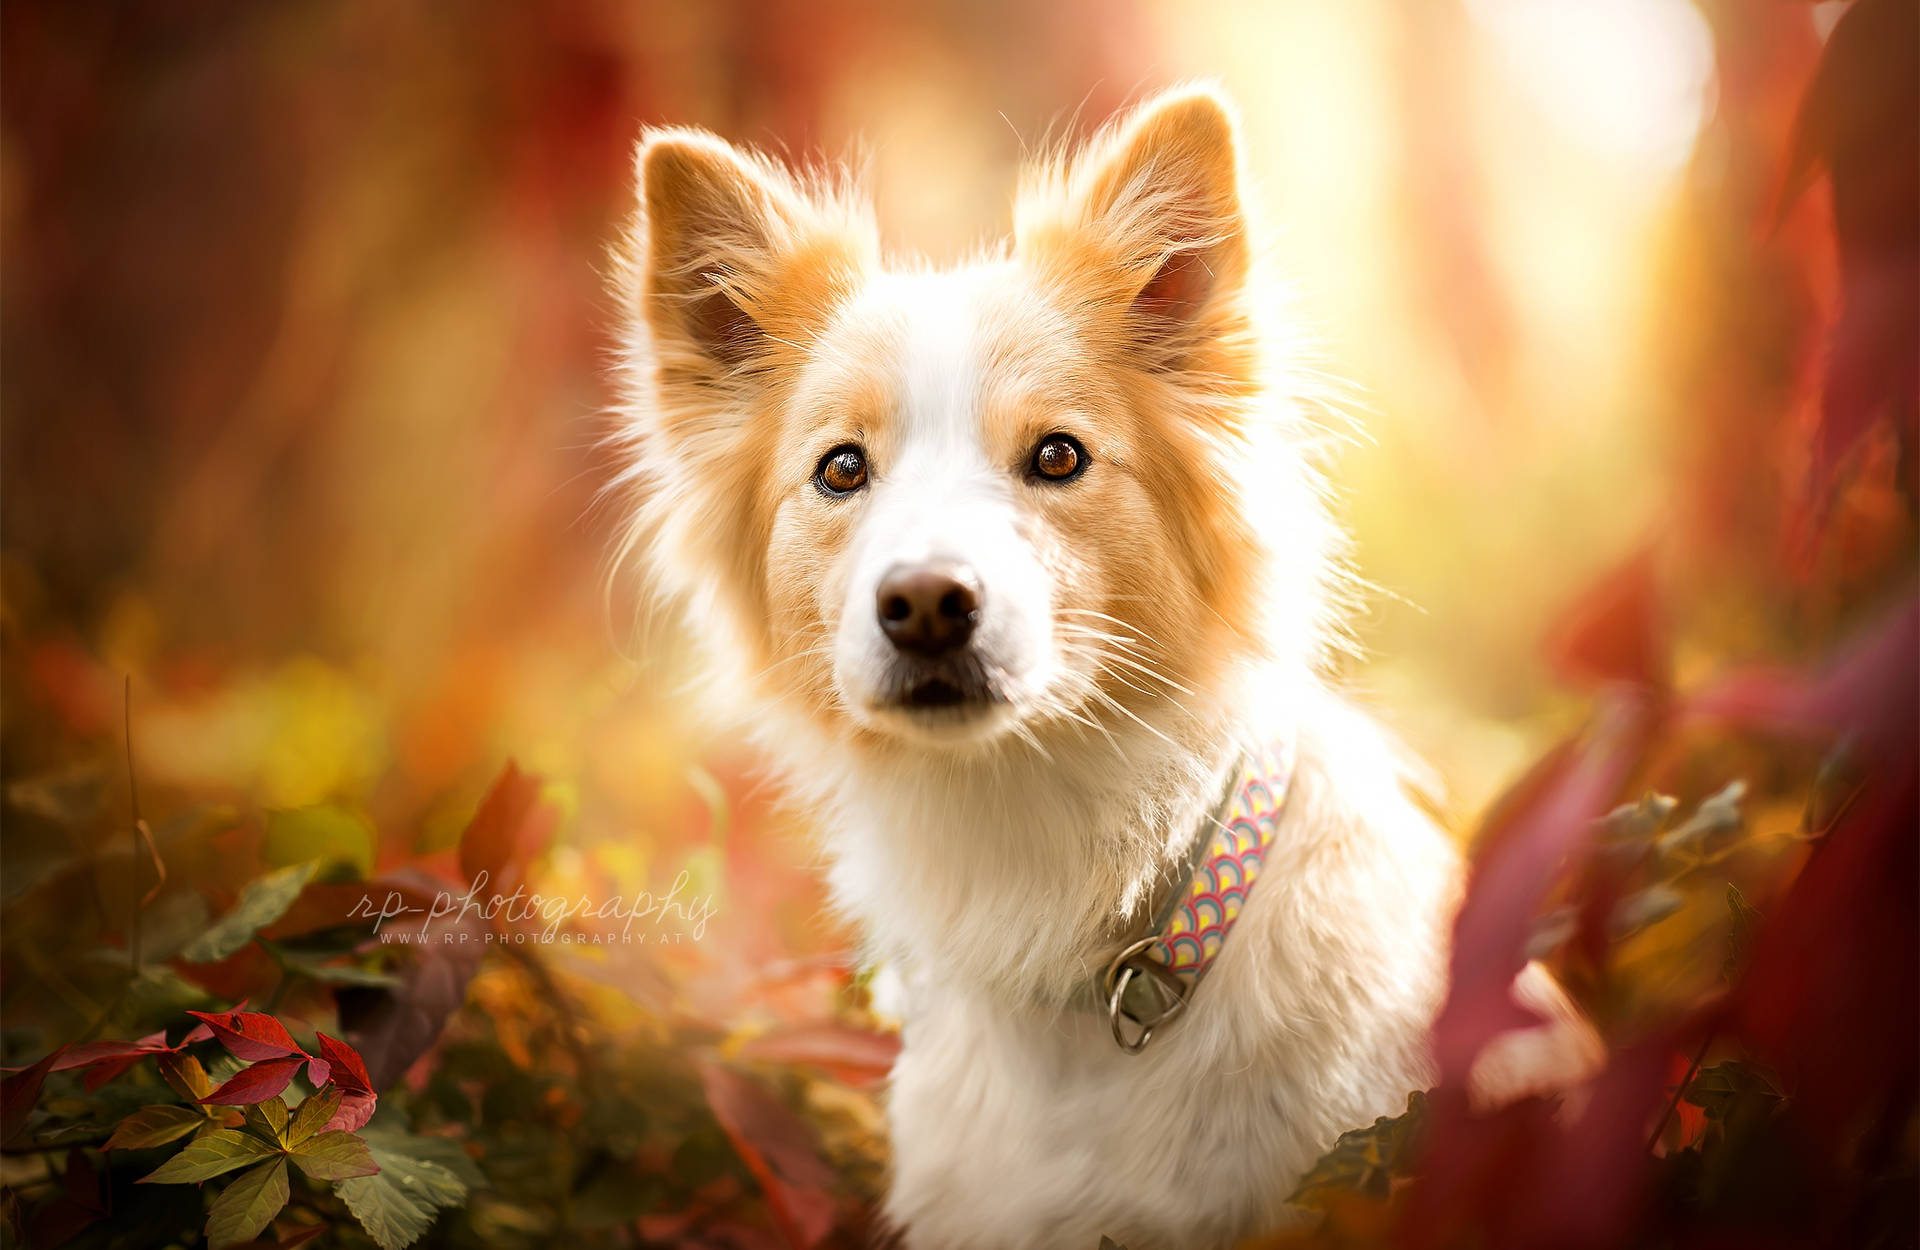 Cute Dog Sitting On Leaves Wallpaper